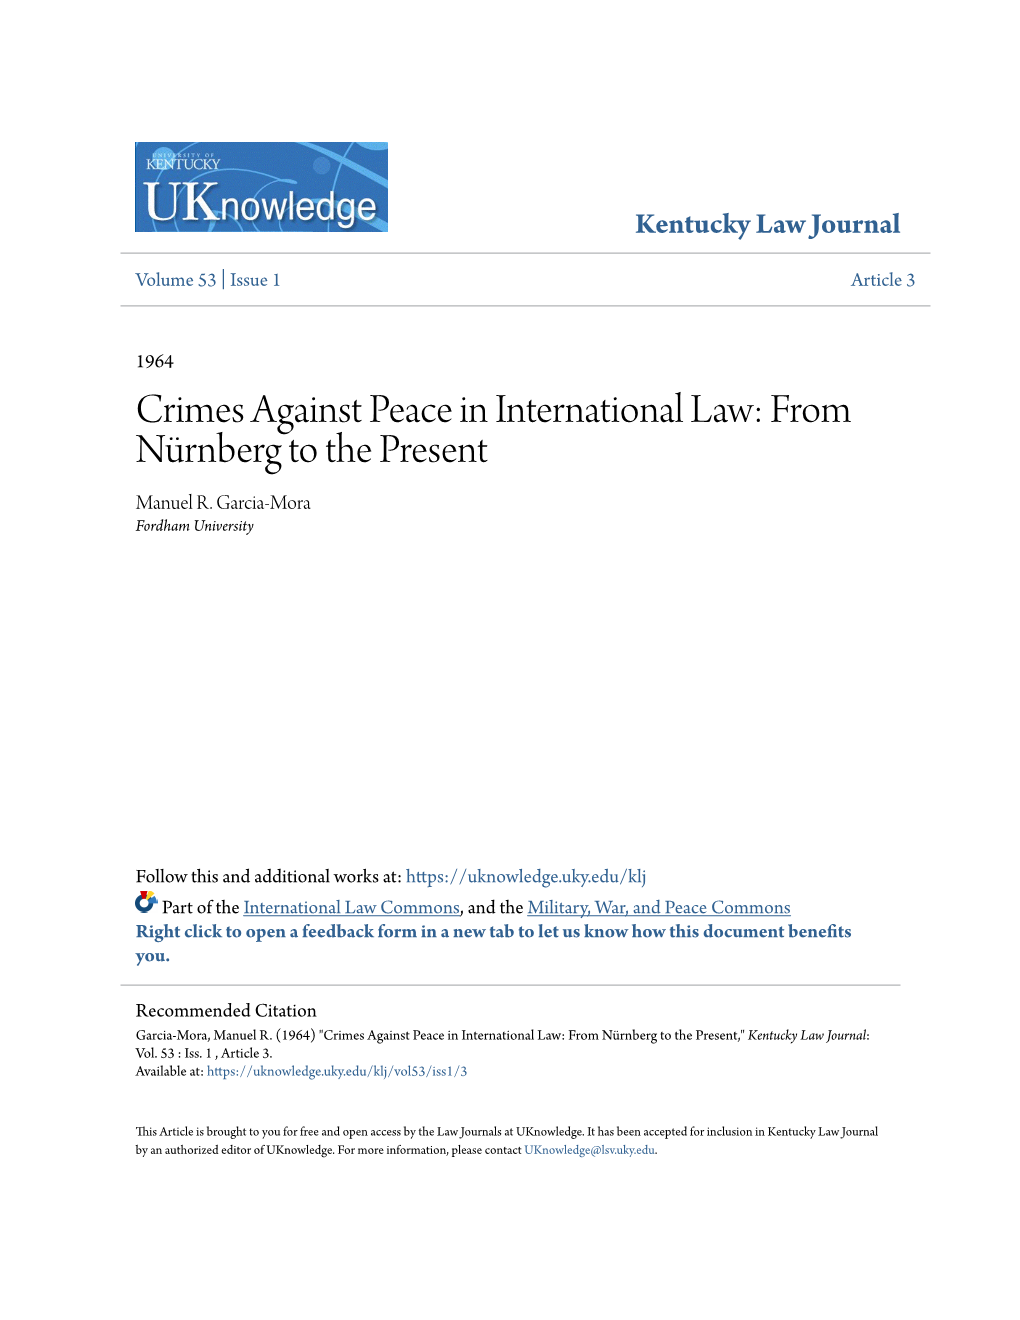 Crimes Against Peace in International Law: from Nürnberg to the Present Manuel R